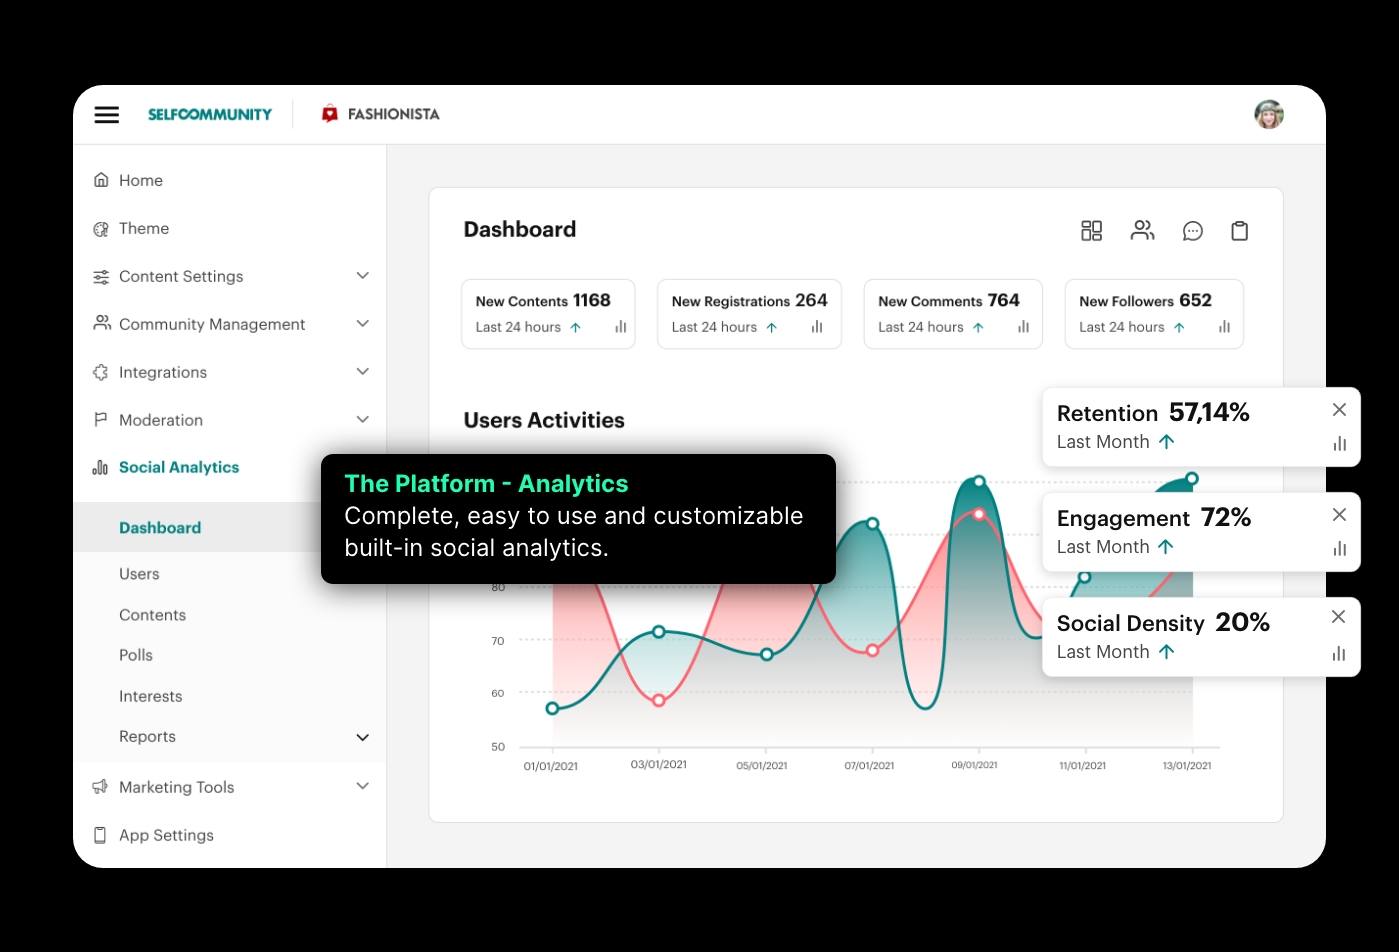 The Platform - Analytics: Complete, easy to use and customizable built-in social analytics.